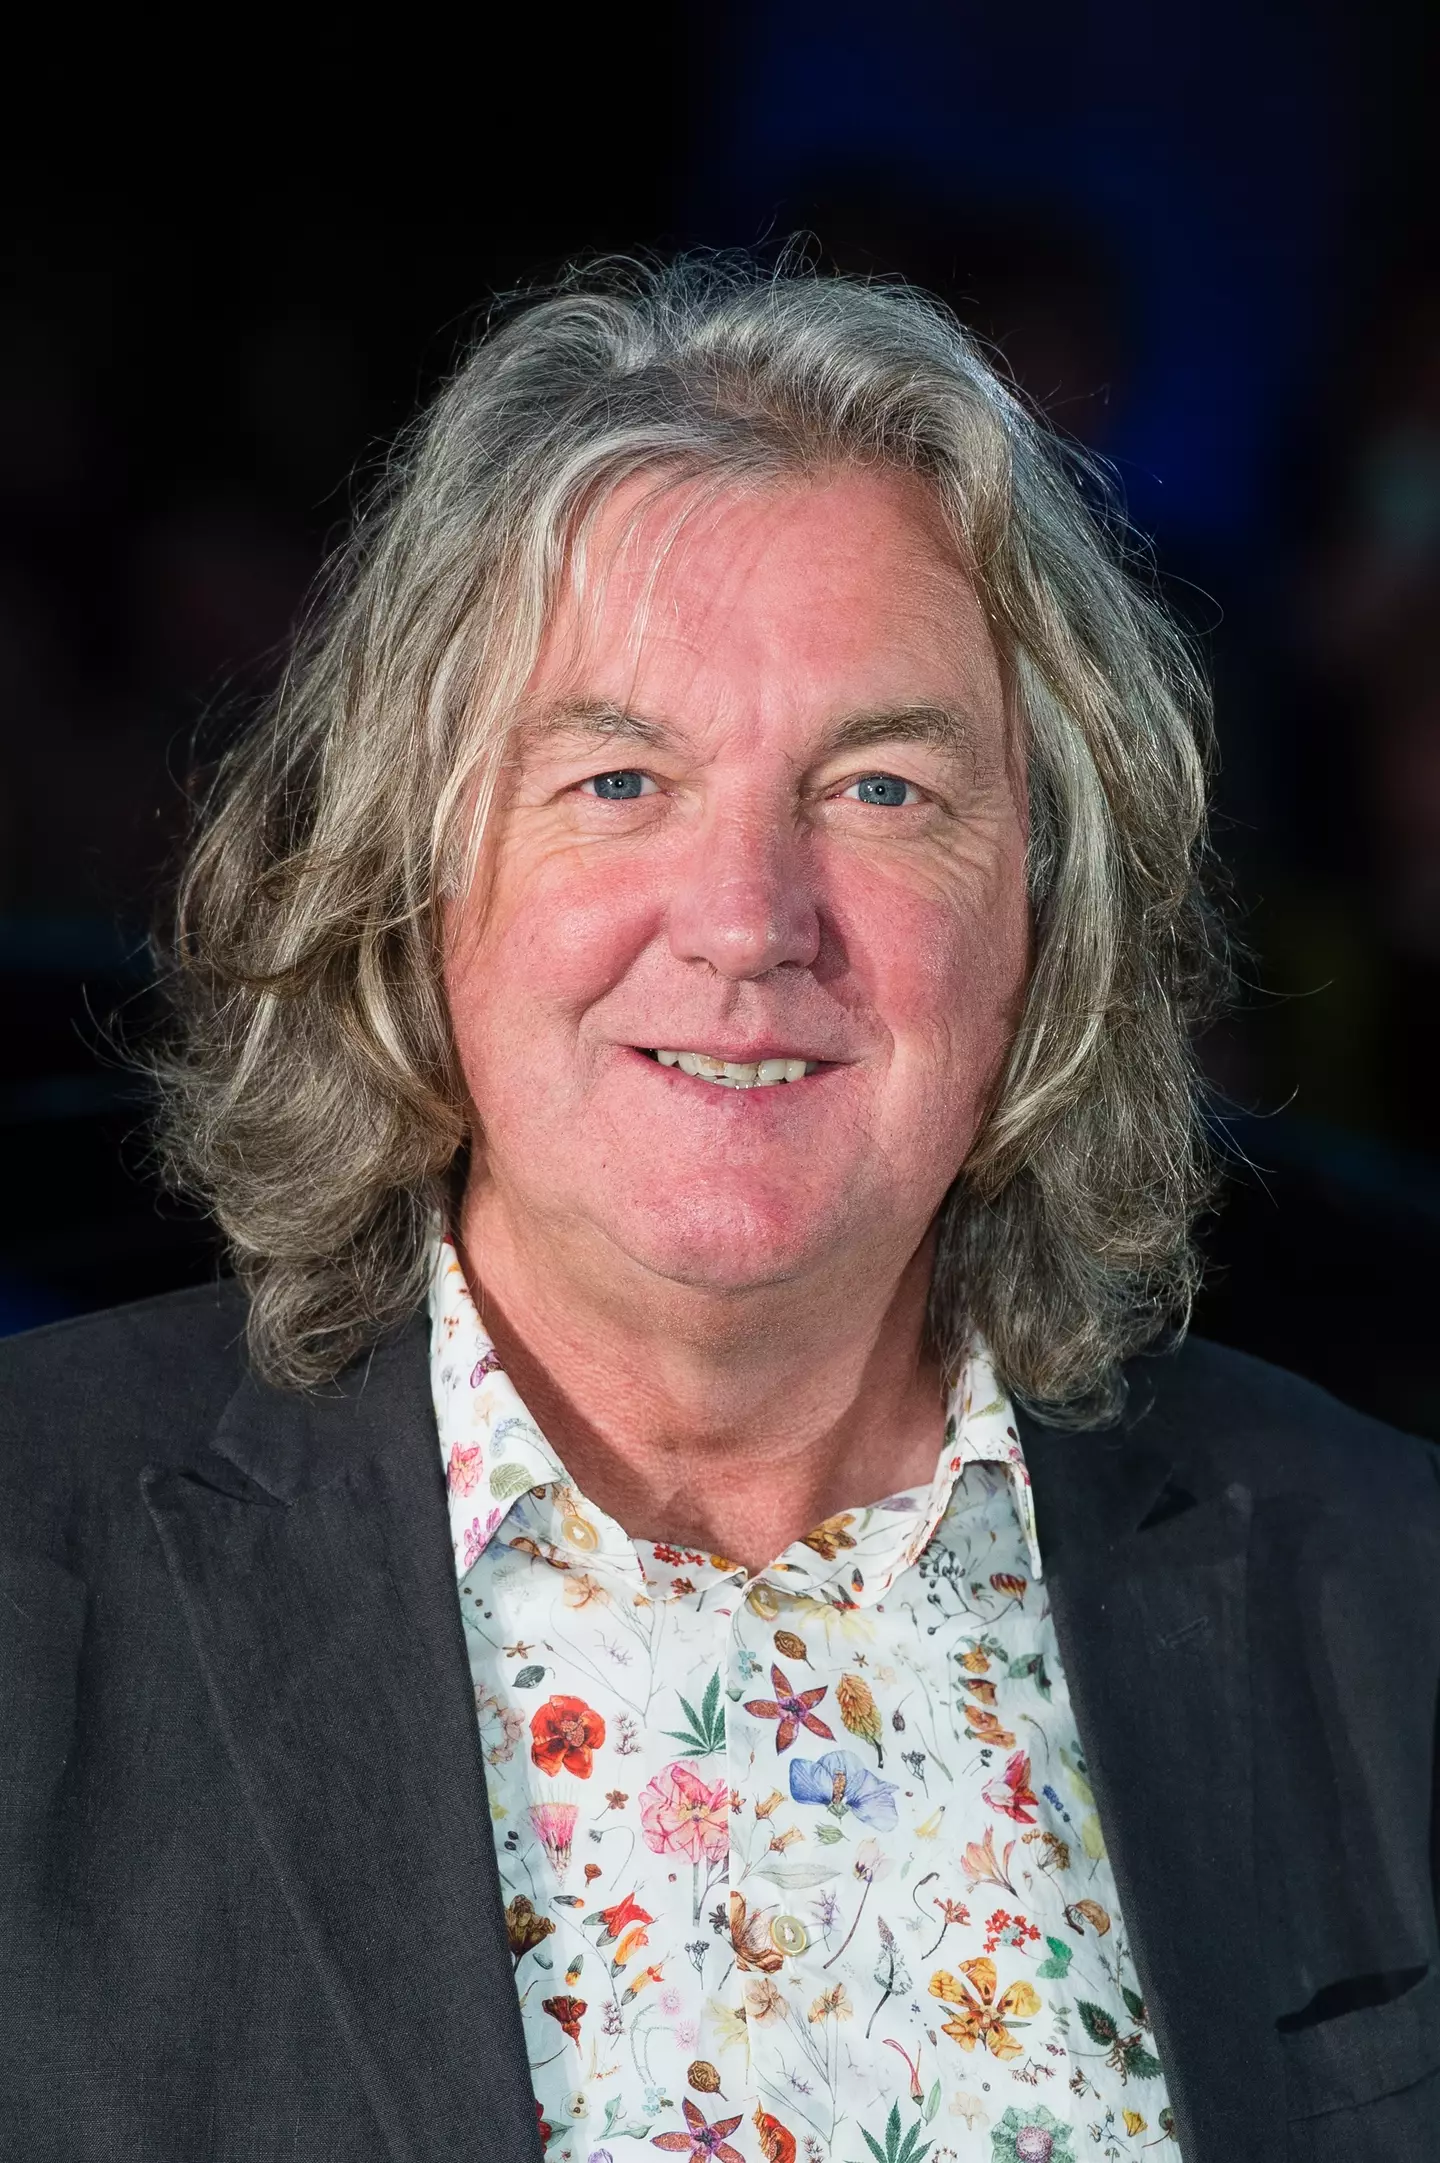 James May is certainly a cereal first kind of man.